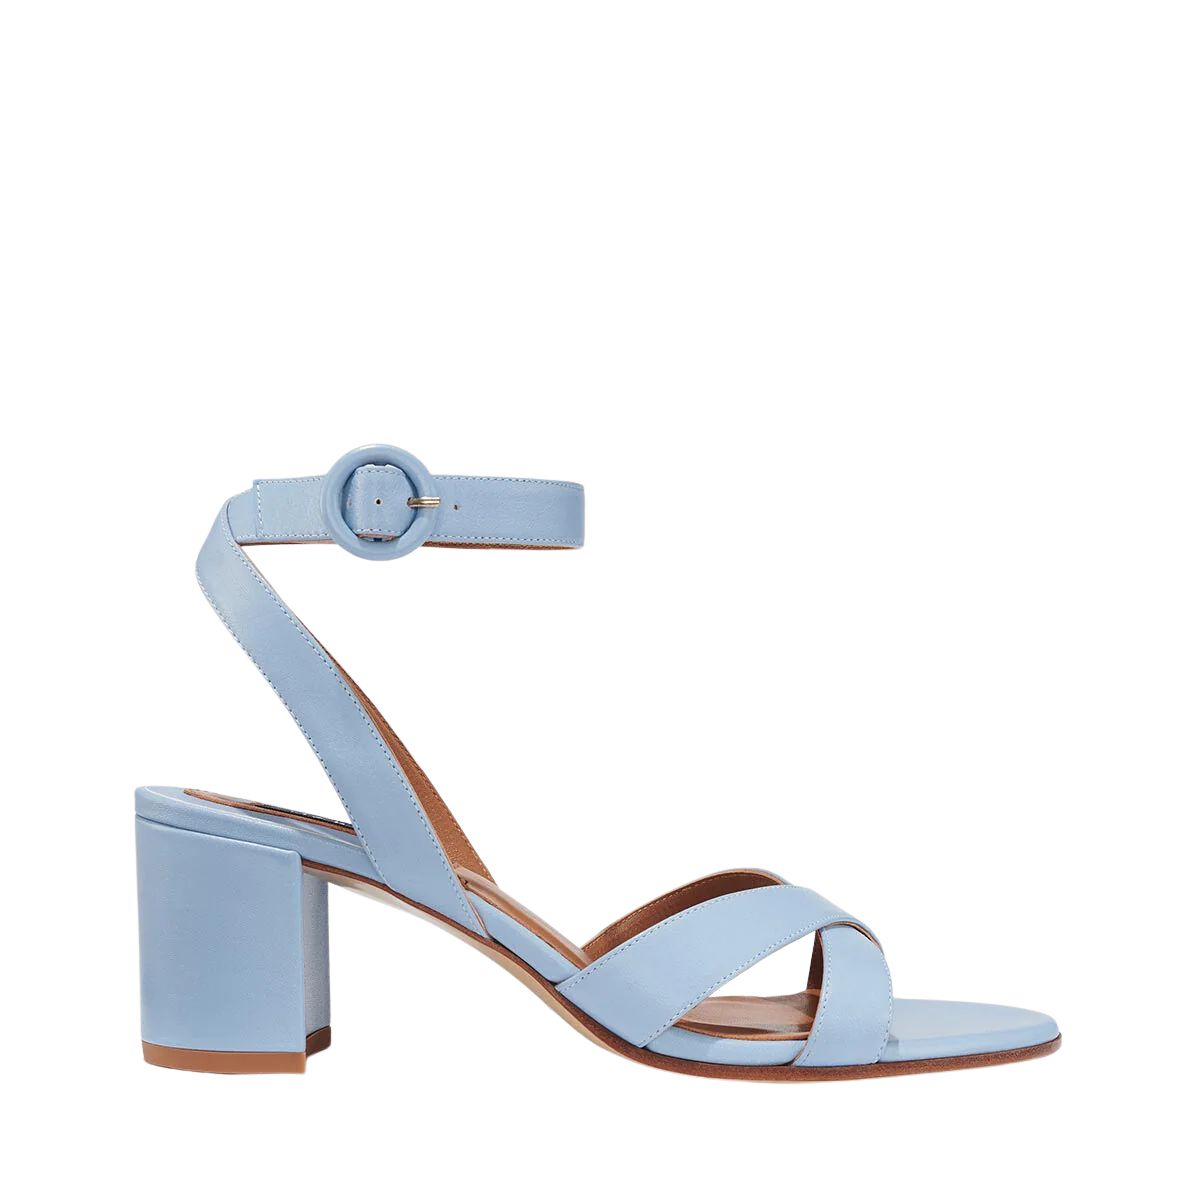 The City Sandal in Fog Nappa | Over The Moon